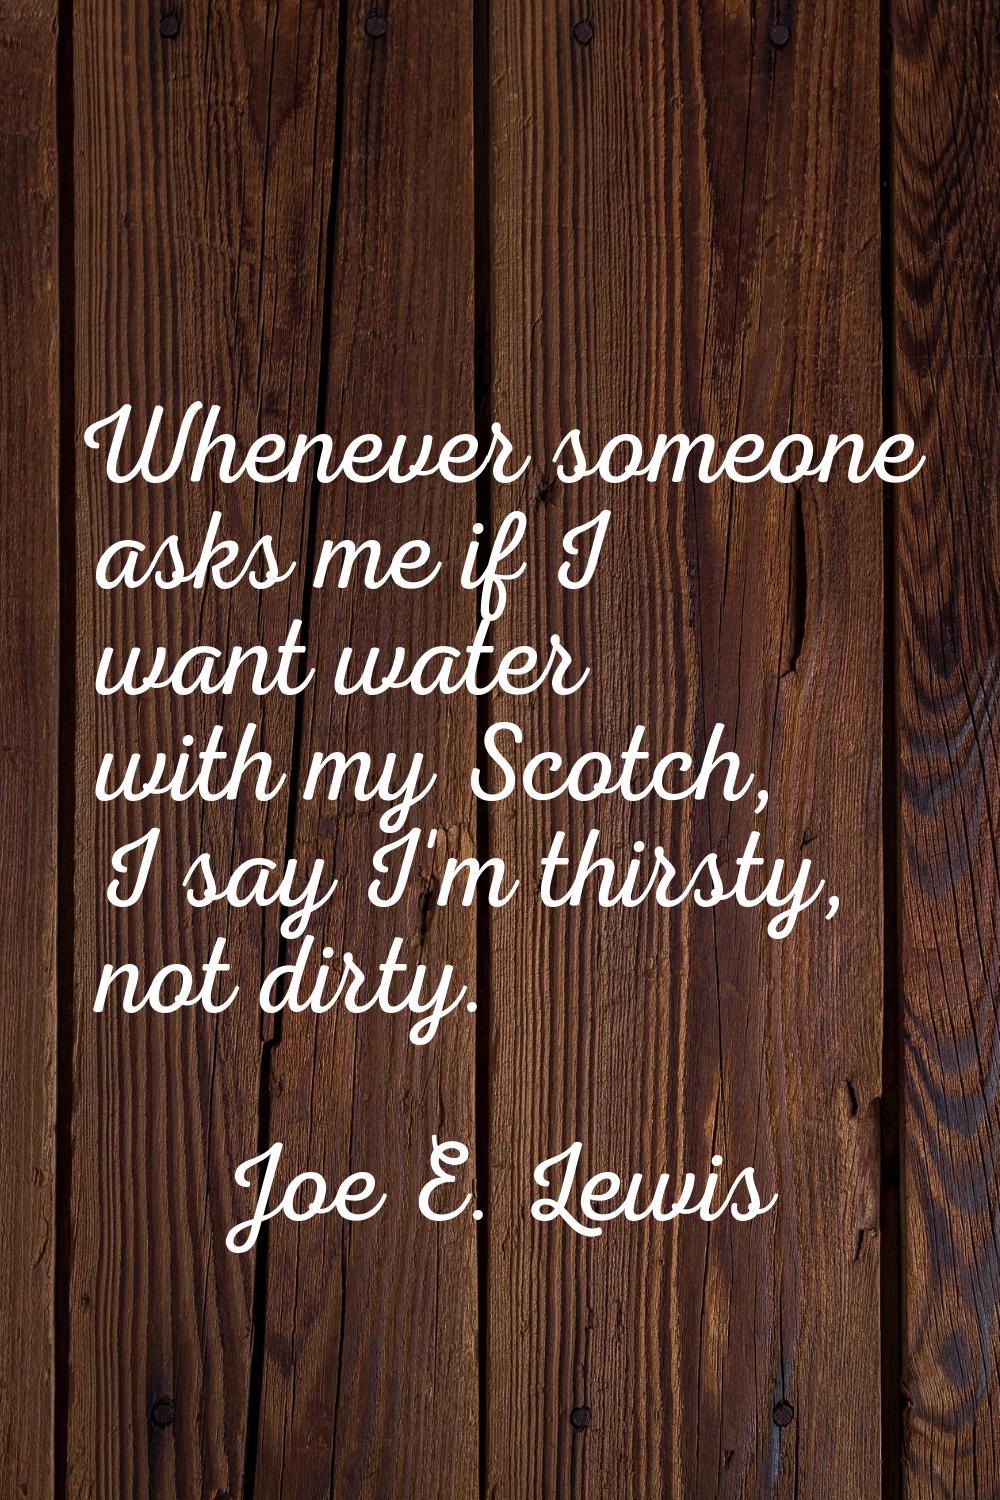 Whenever someone asks me if I want water with my Scotch, I say I'm thirsty, not dirty.